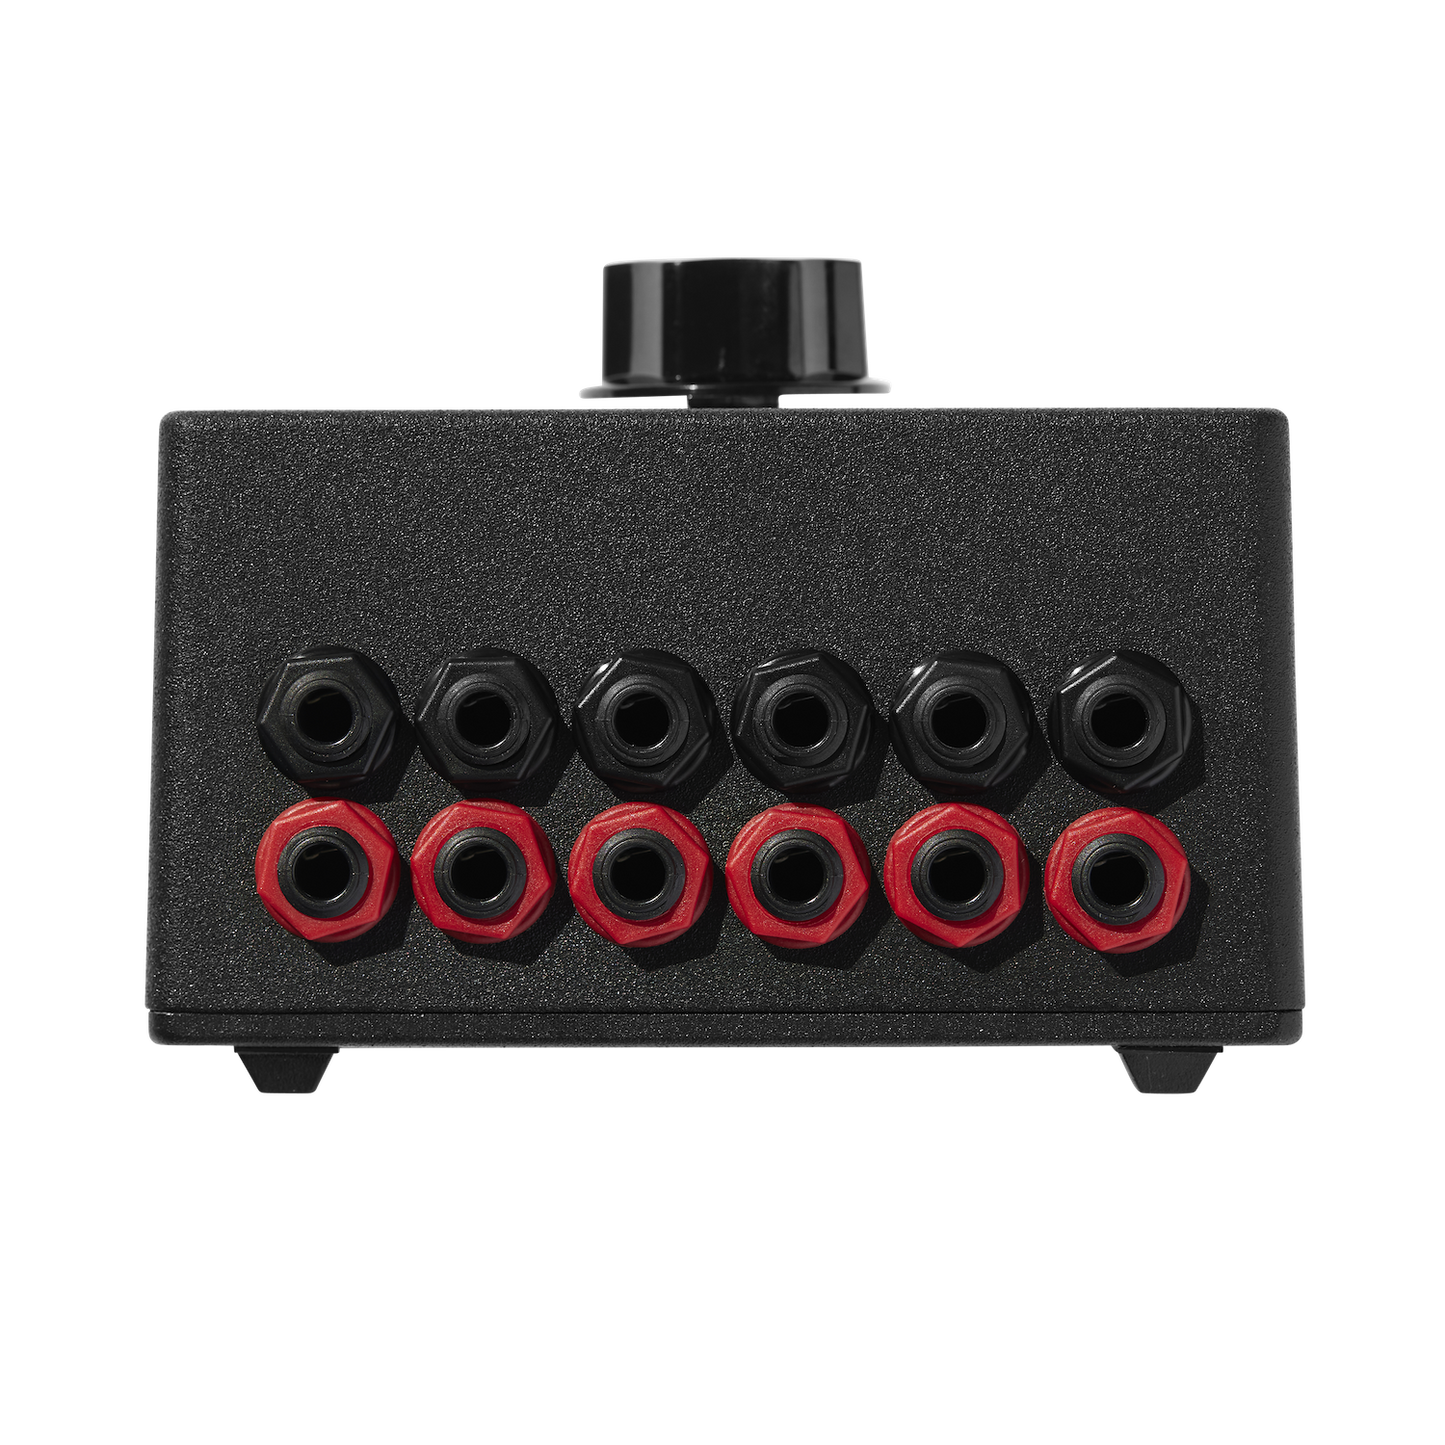 SS-6 Switchable Input Stereo DI